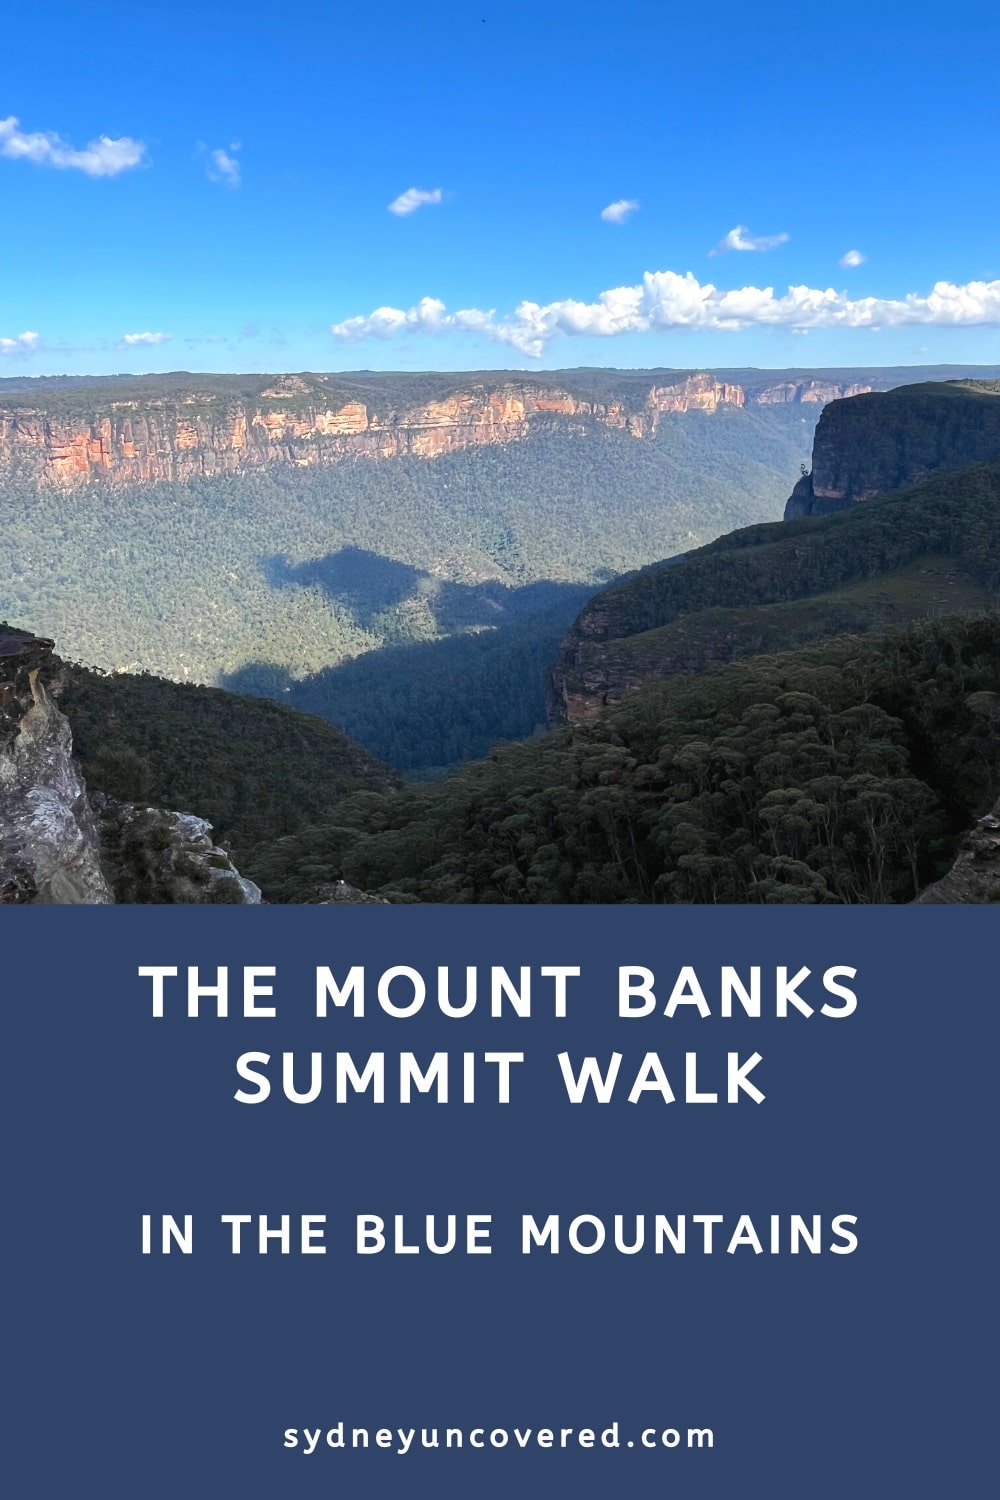 The Mount Banks Summit Walk in the Blue Mountains